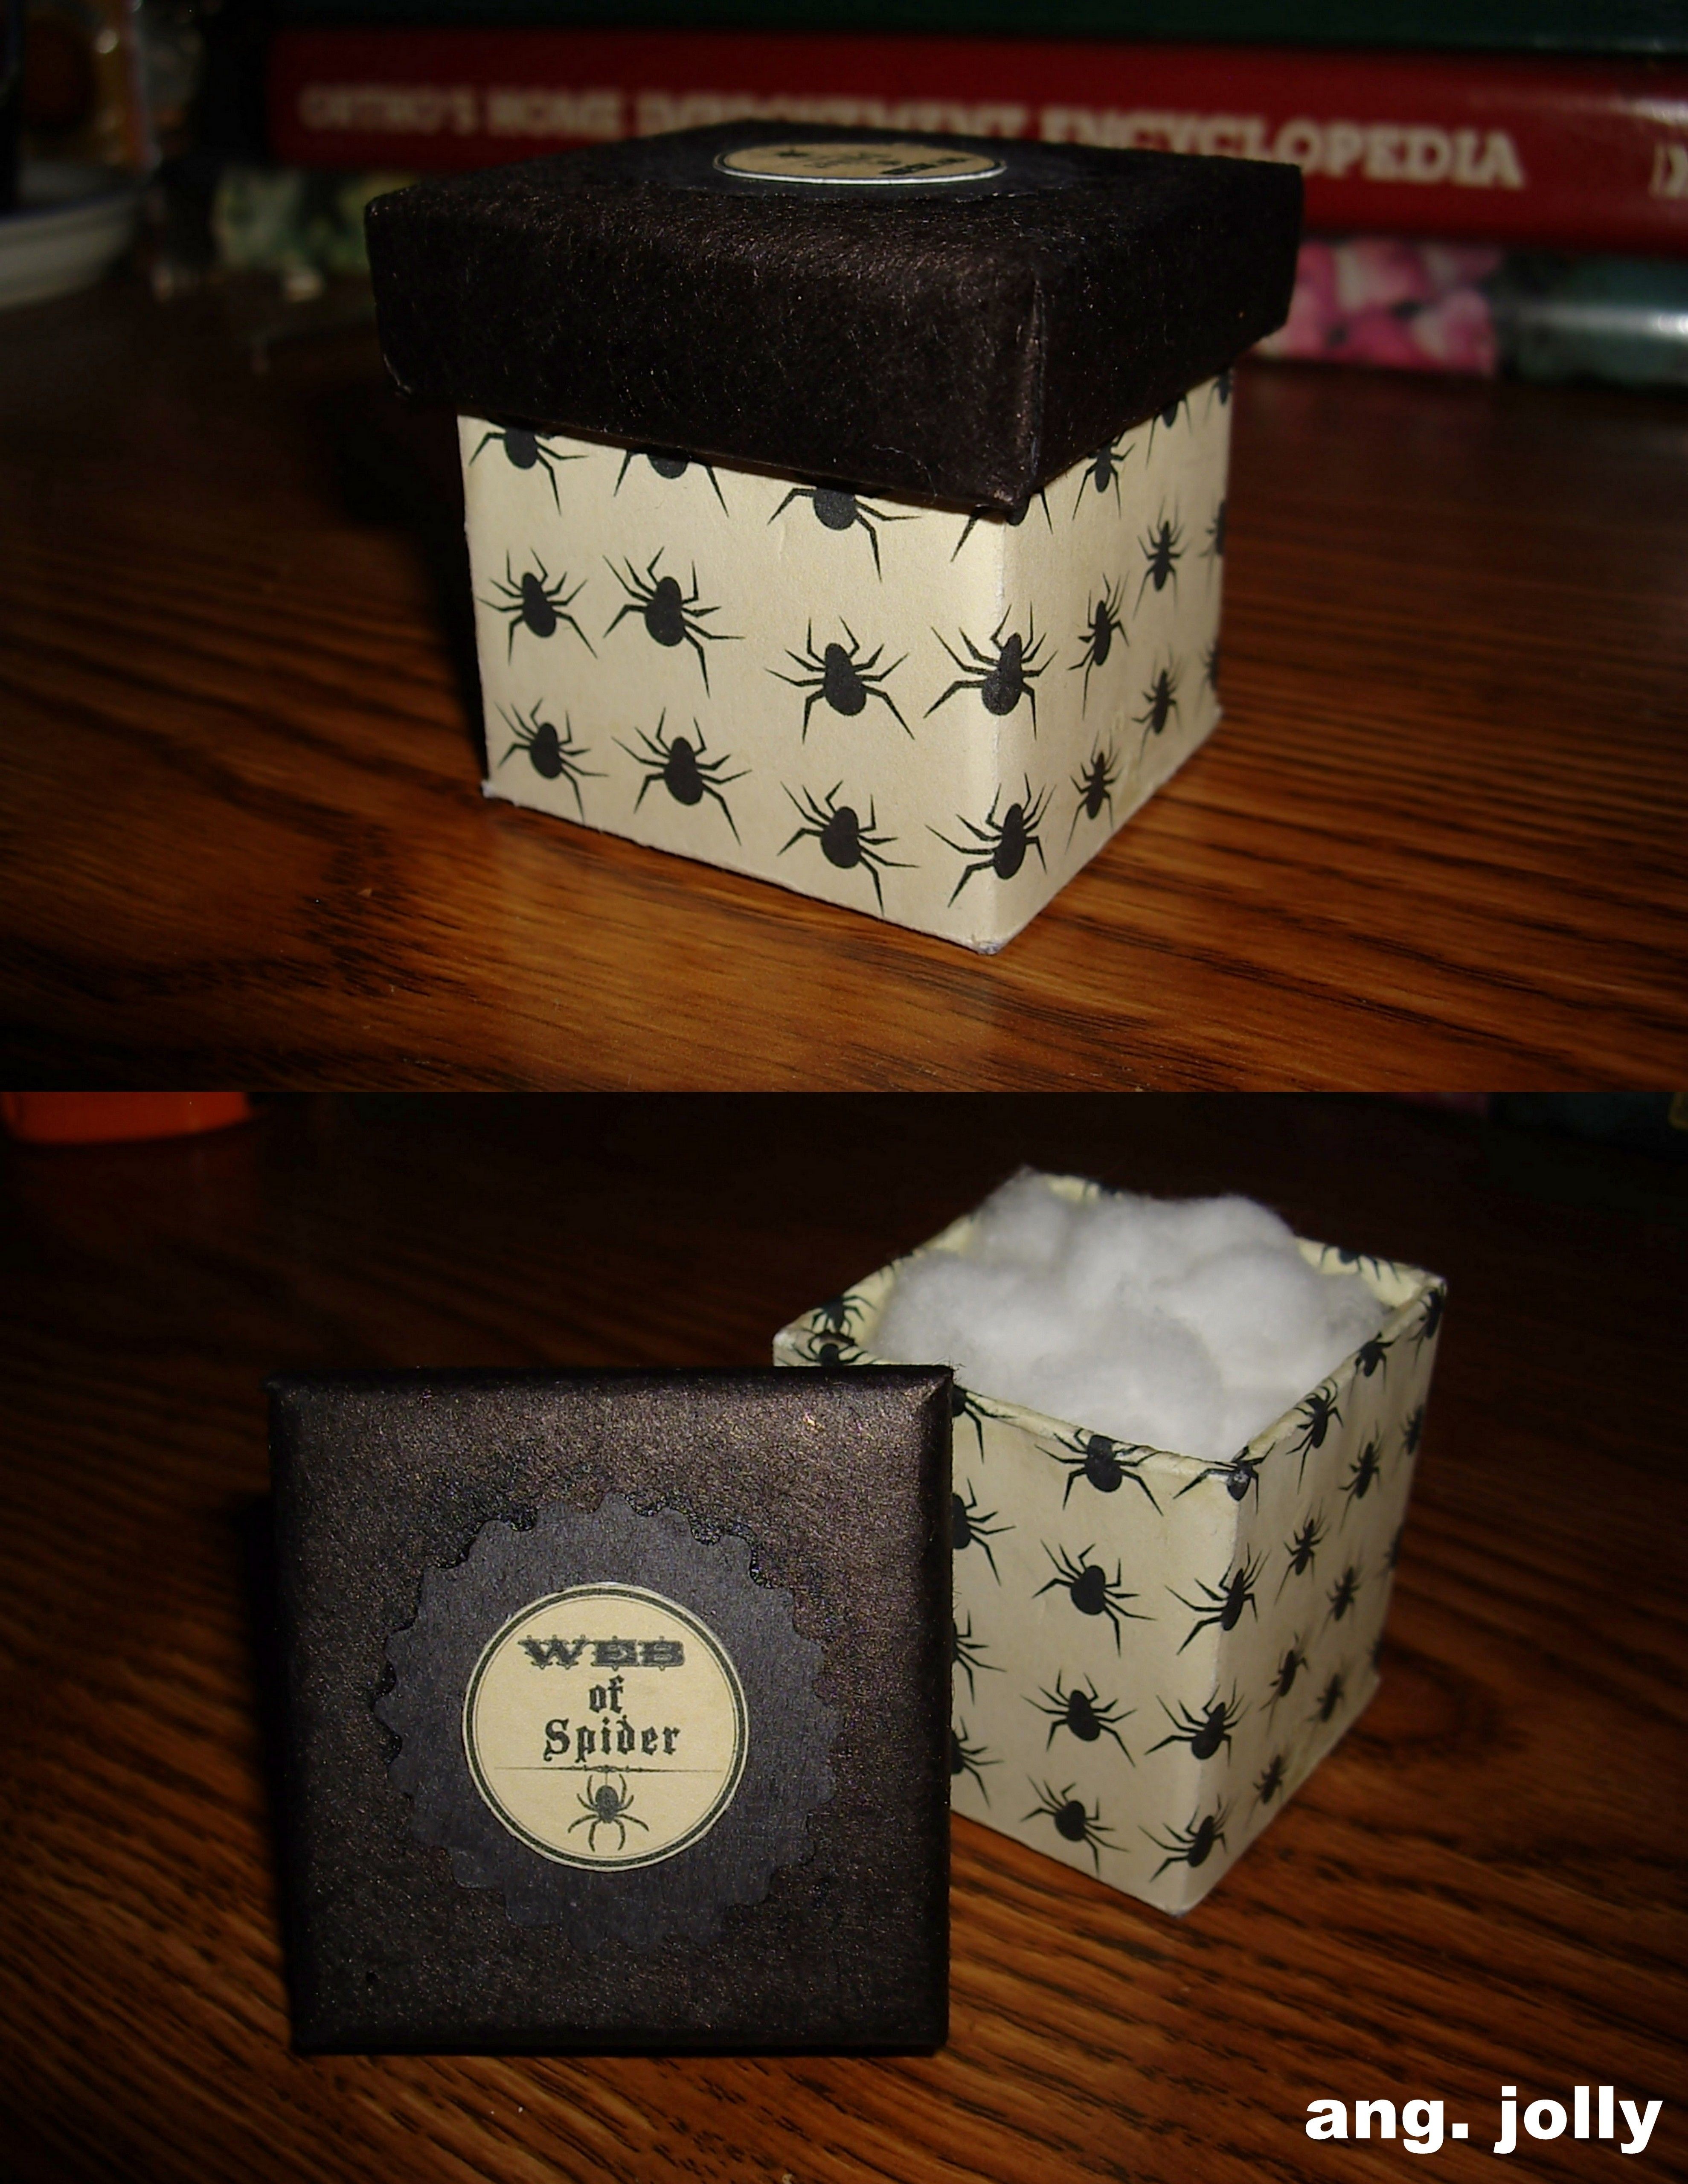 Ball Papercraft Halloween Papercraft Box Filled with Cotton Balls for "web Of Spider